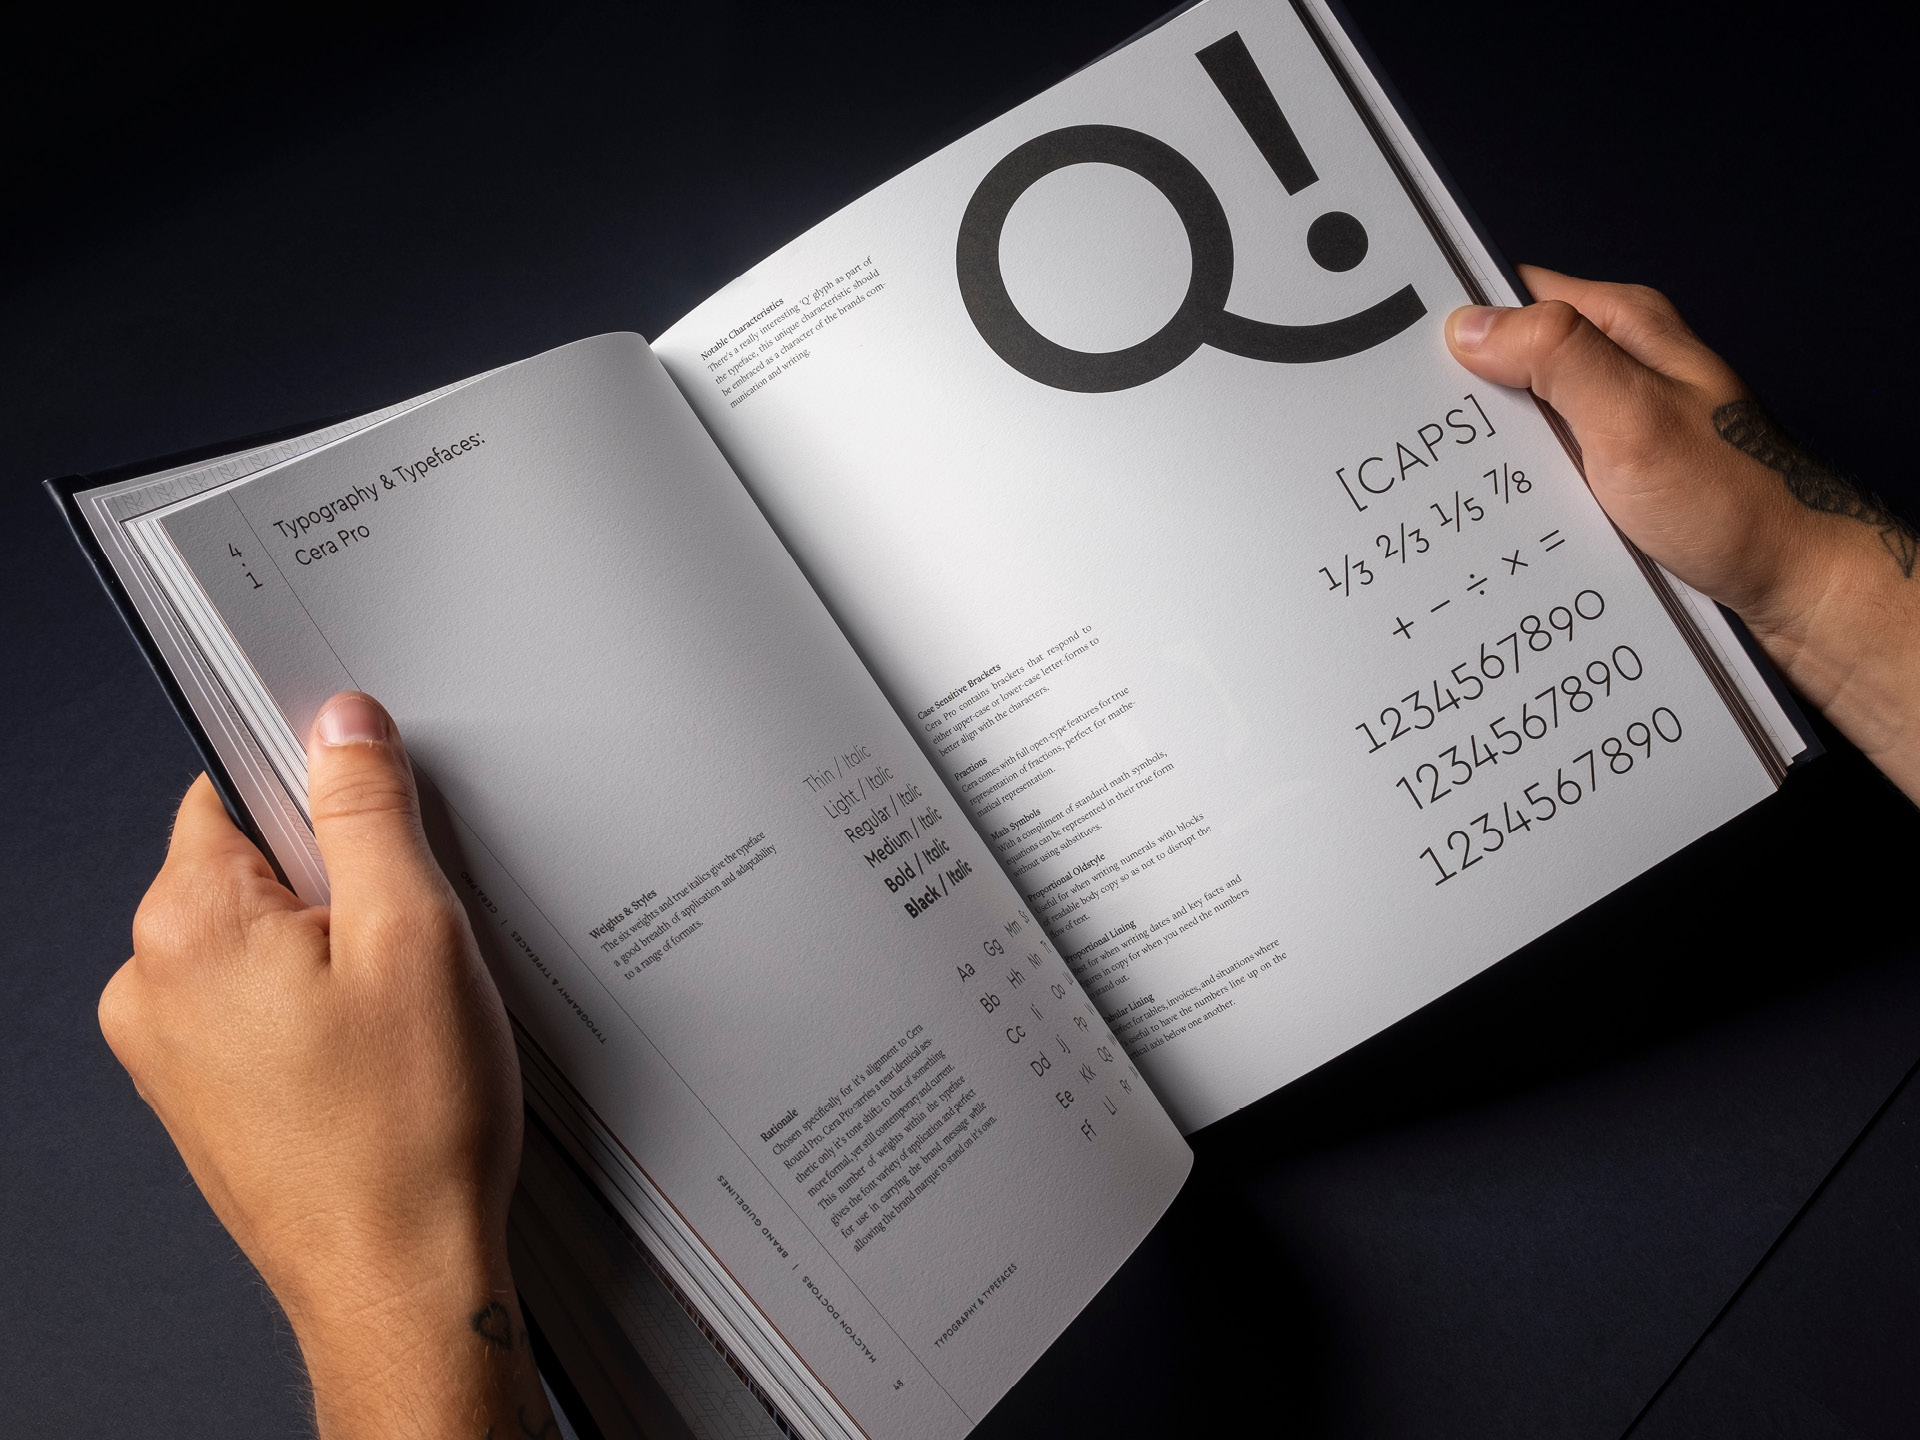 A printed spread from the Halcyon Doctors brand guidelines featuring the type Cera Pro used in the brand